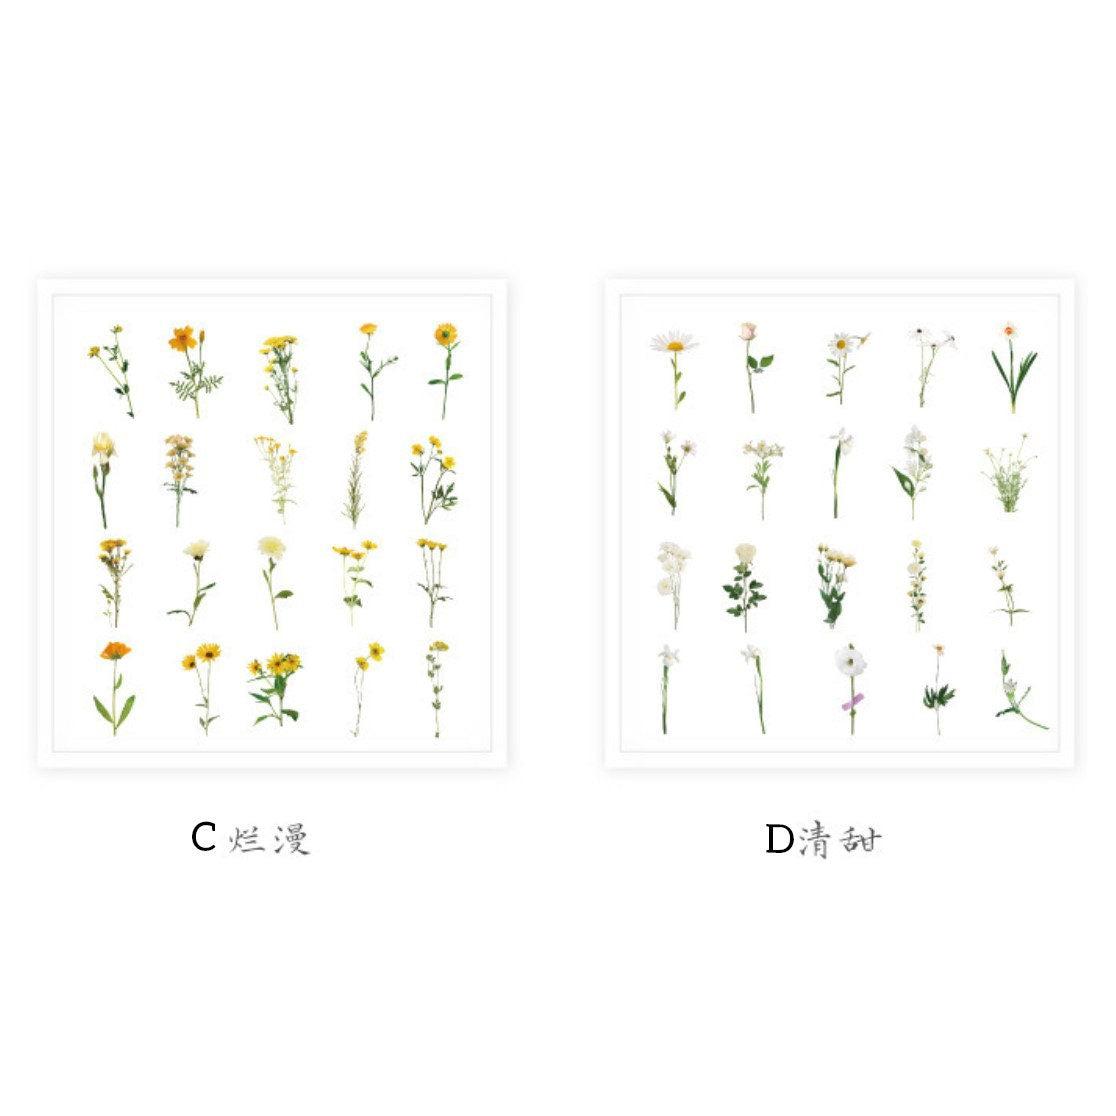 40pcs Yellow Flower Stickers Pack, Pressed Flowers Plant Specimen Stickers